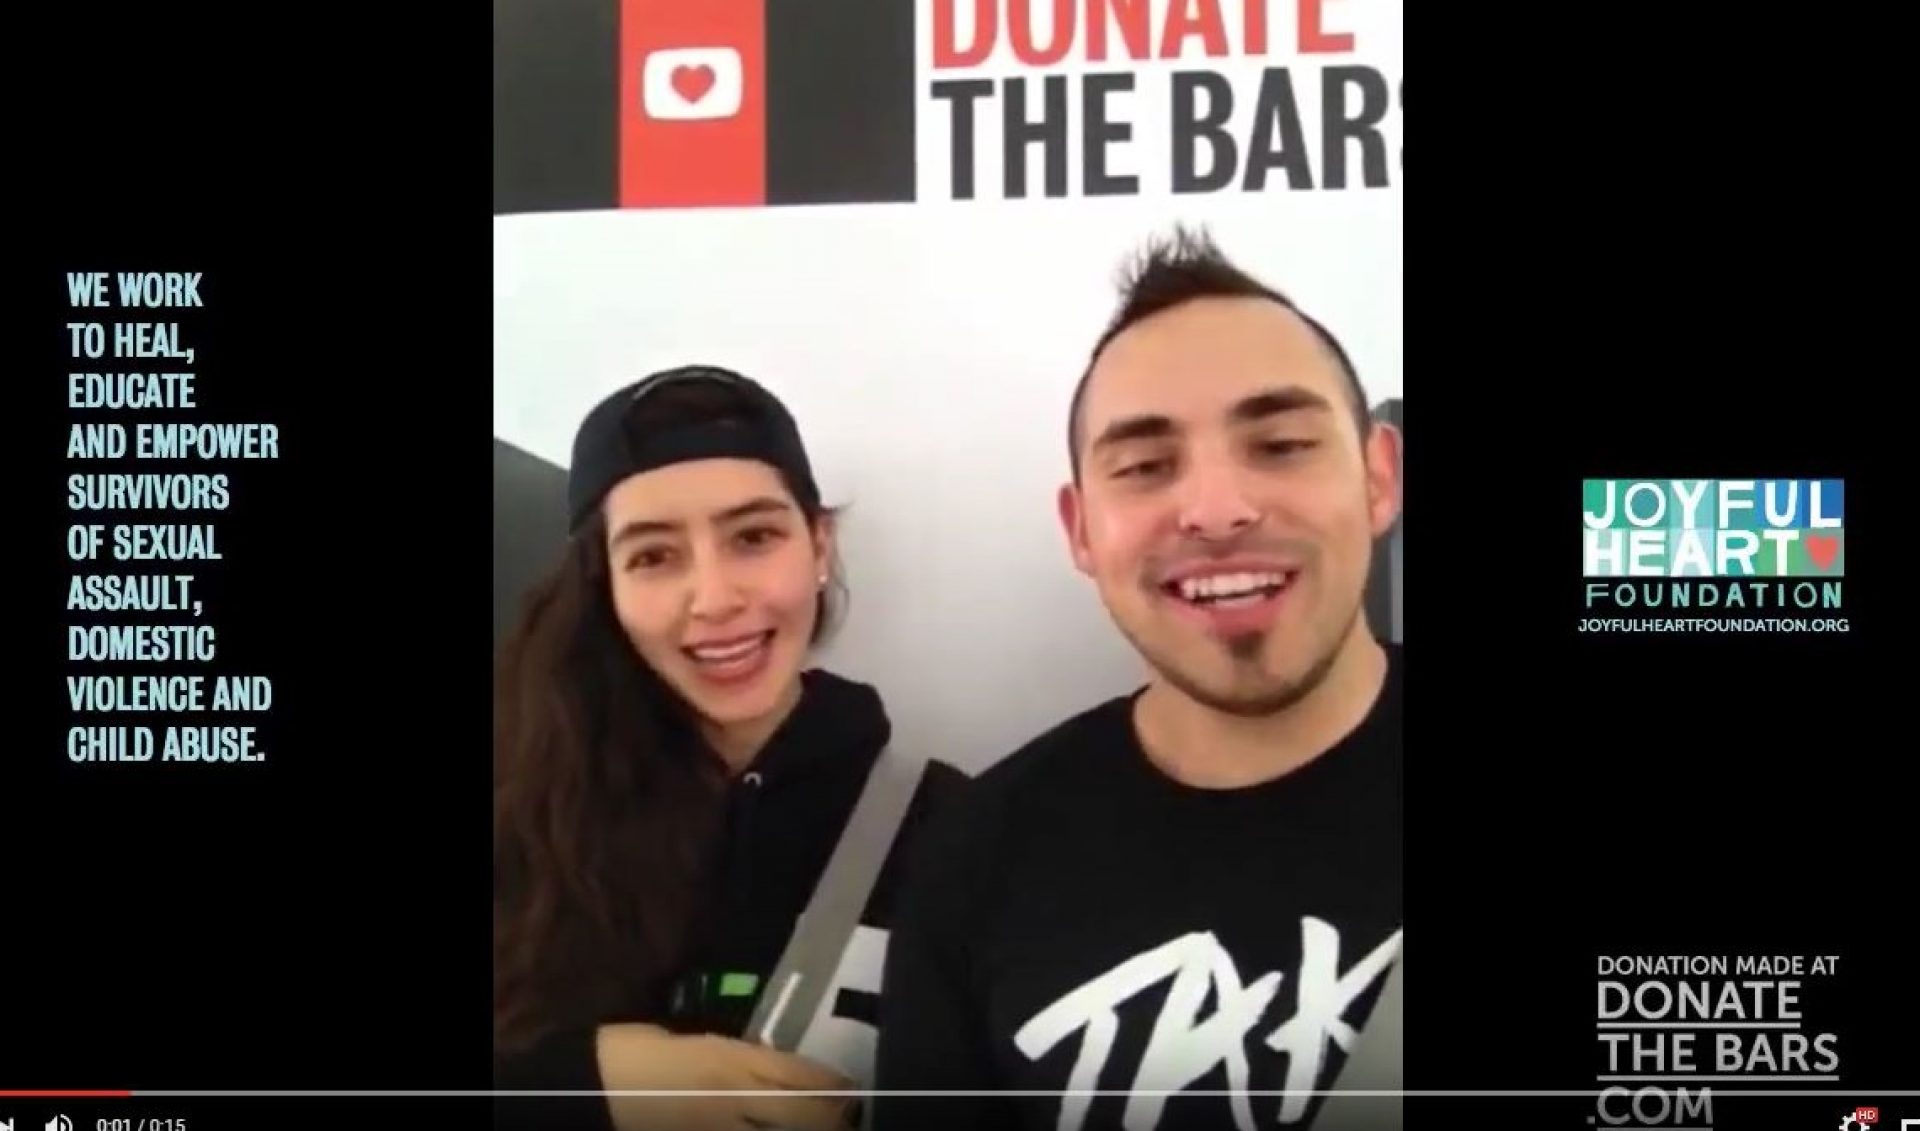 ‘Donate The Bars’ Charity Campaign Aims To Raise Awareness Via Vertical Video Syndrome